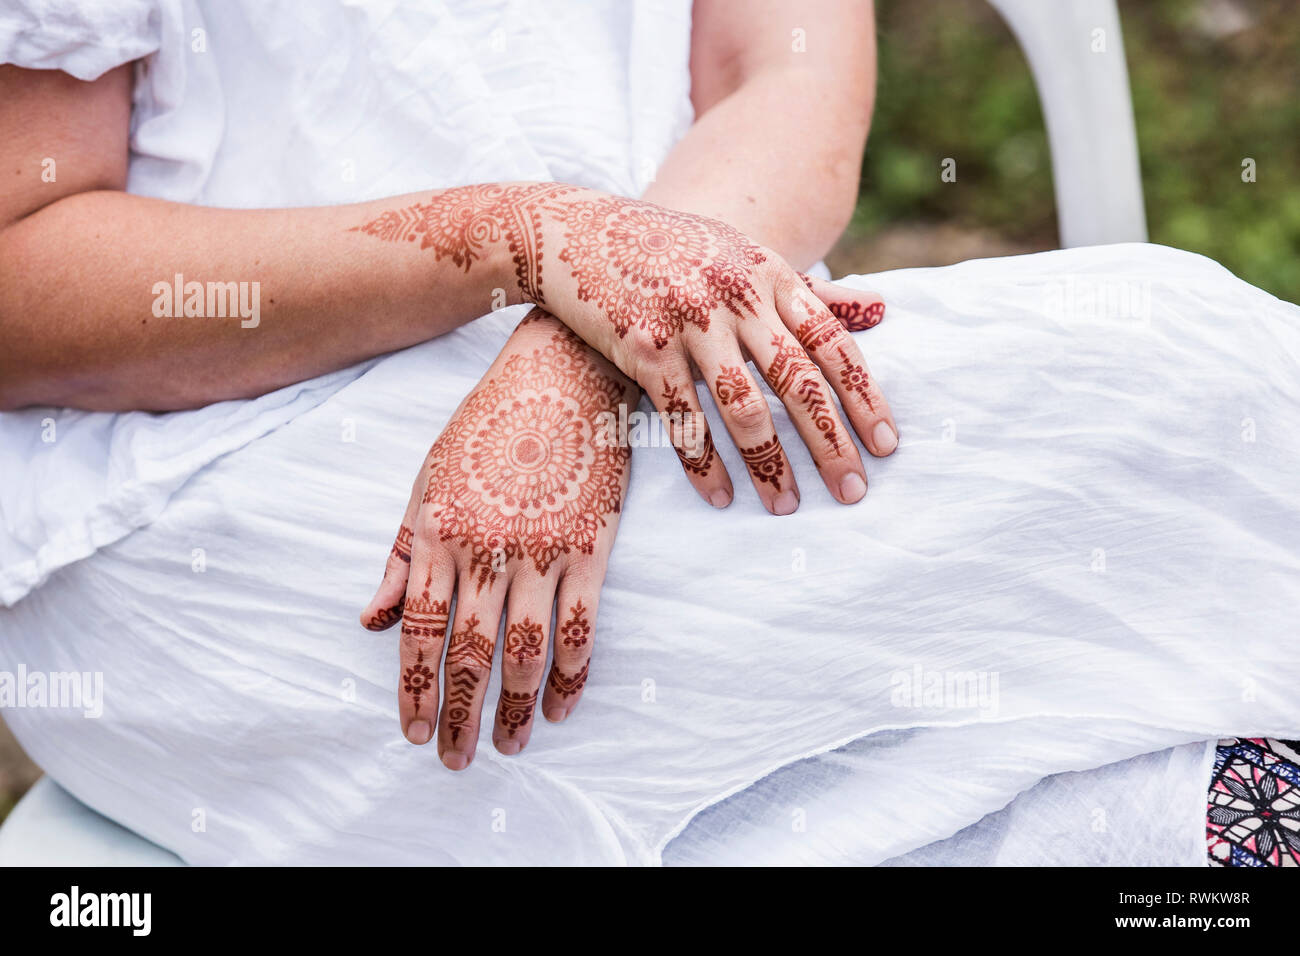 Woman in white dress with henna tattoo on hands Stock Photo